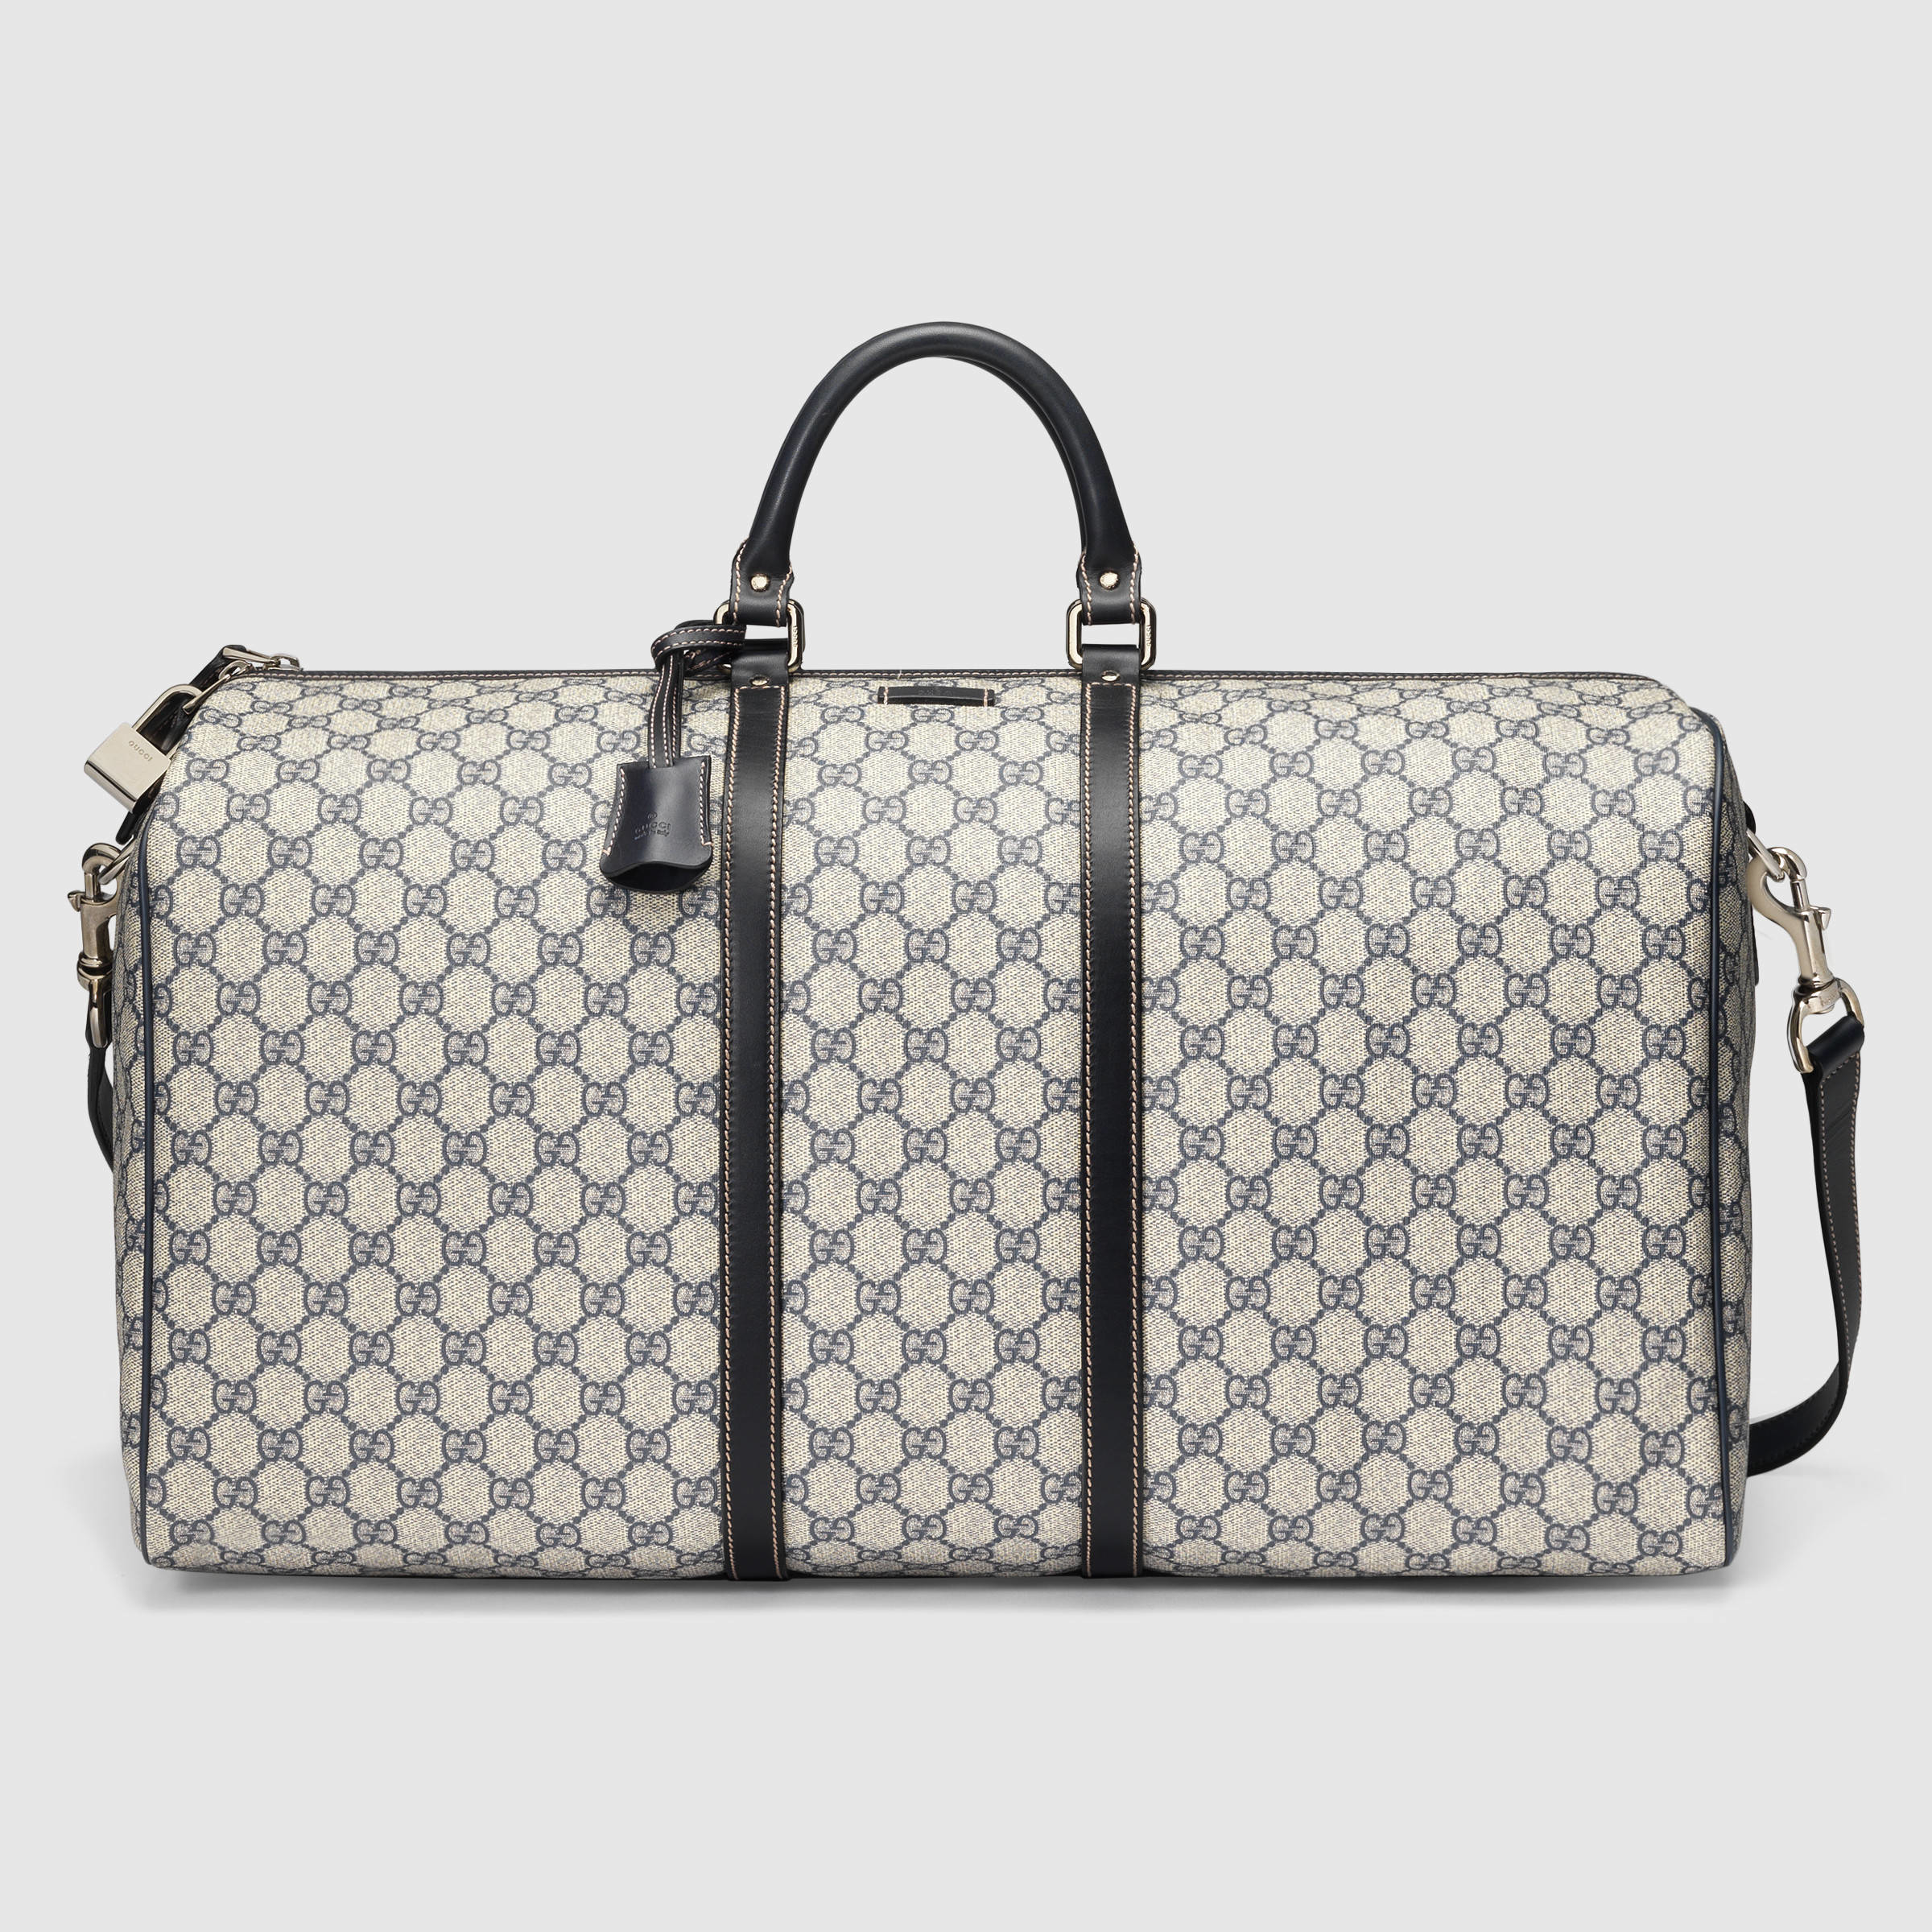 Lyst - Gucci Large Carry-on Duffle With Shoulder Strap in Natural for Men